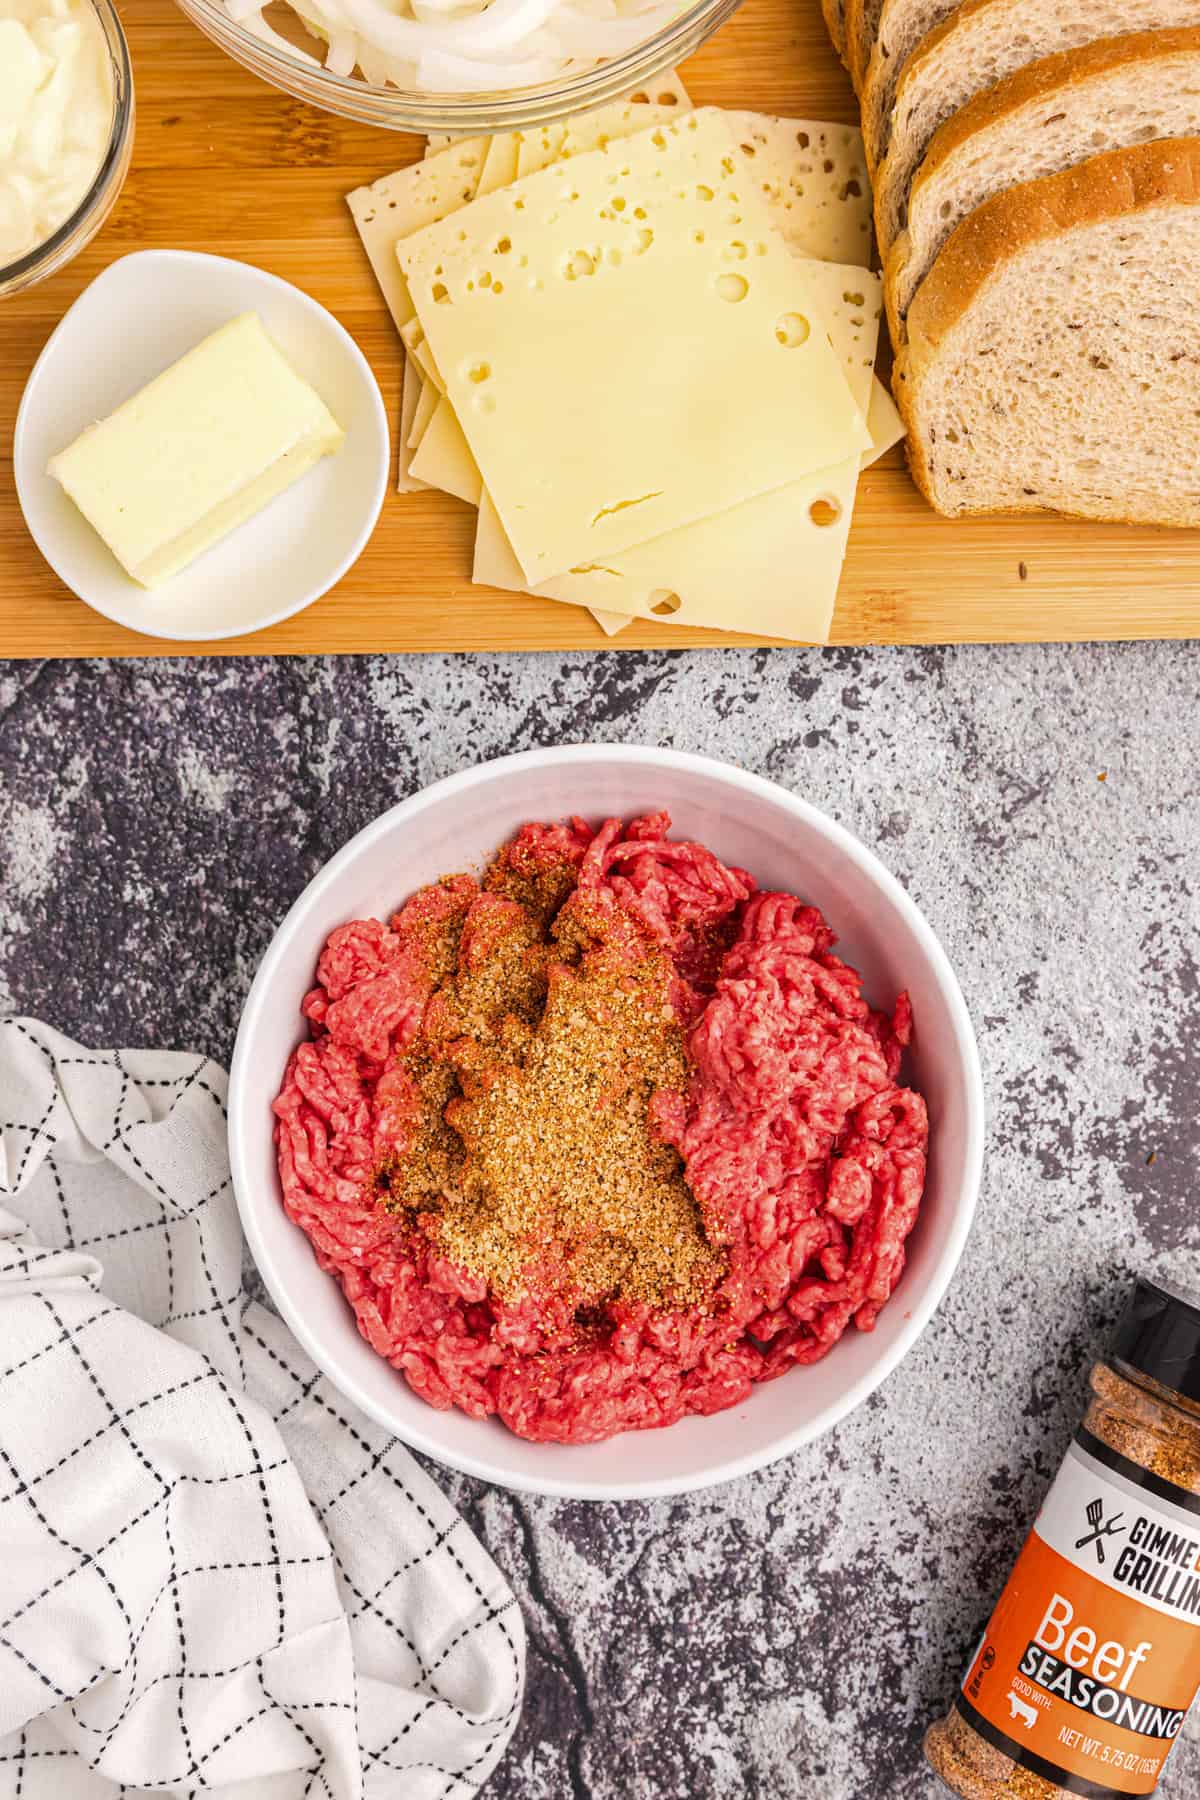 Combining ground beef with beef seasoning for Blackstone Patty Melt recipe